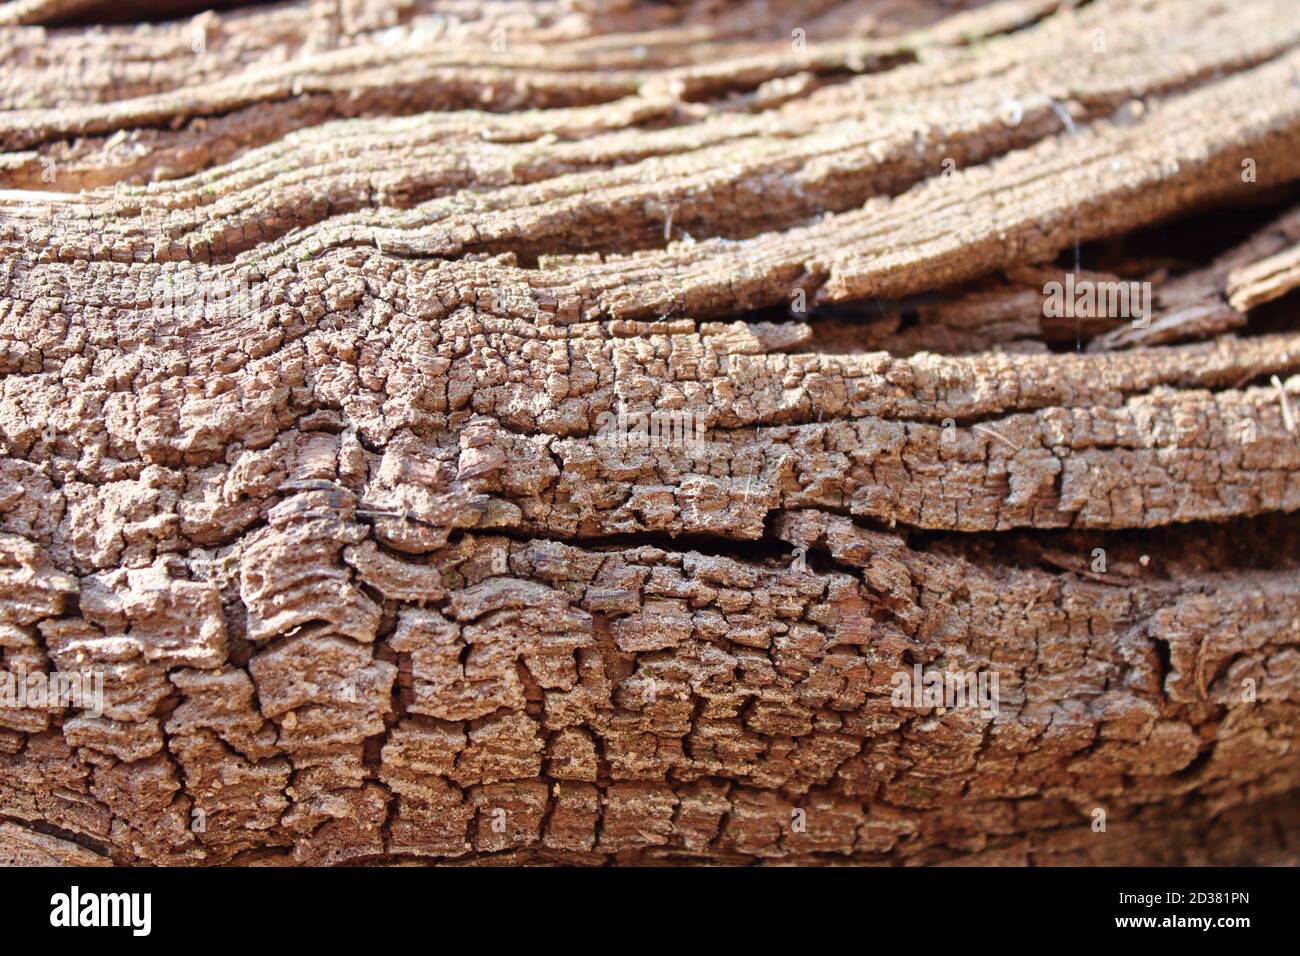 sinuous texture of a dry wooden trunk Stock Photo